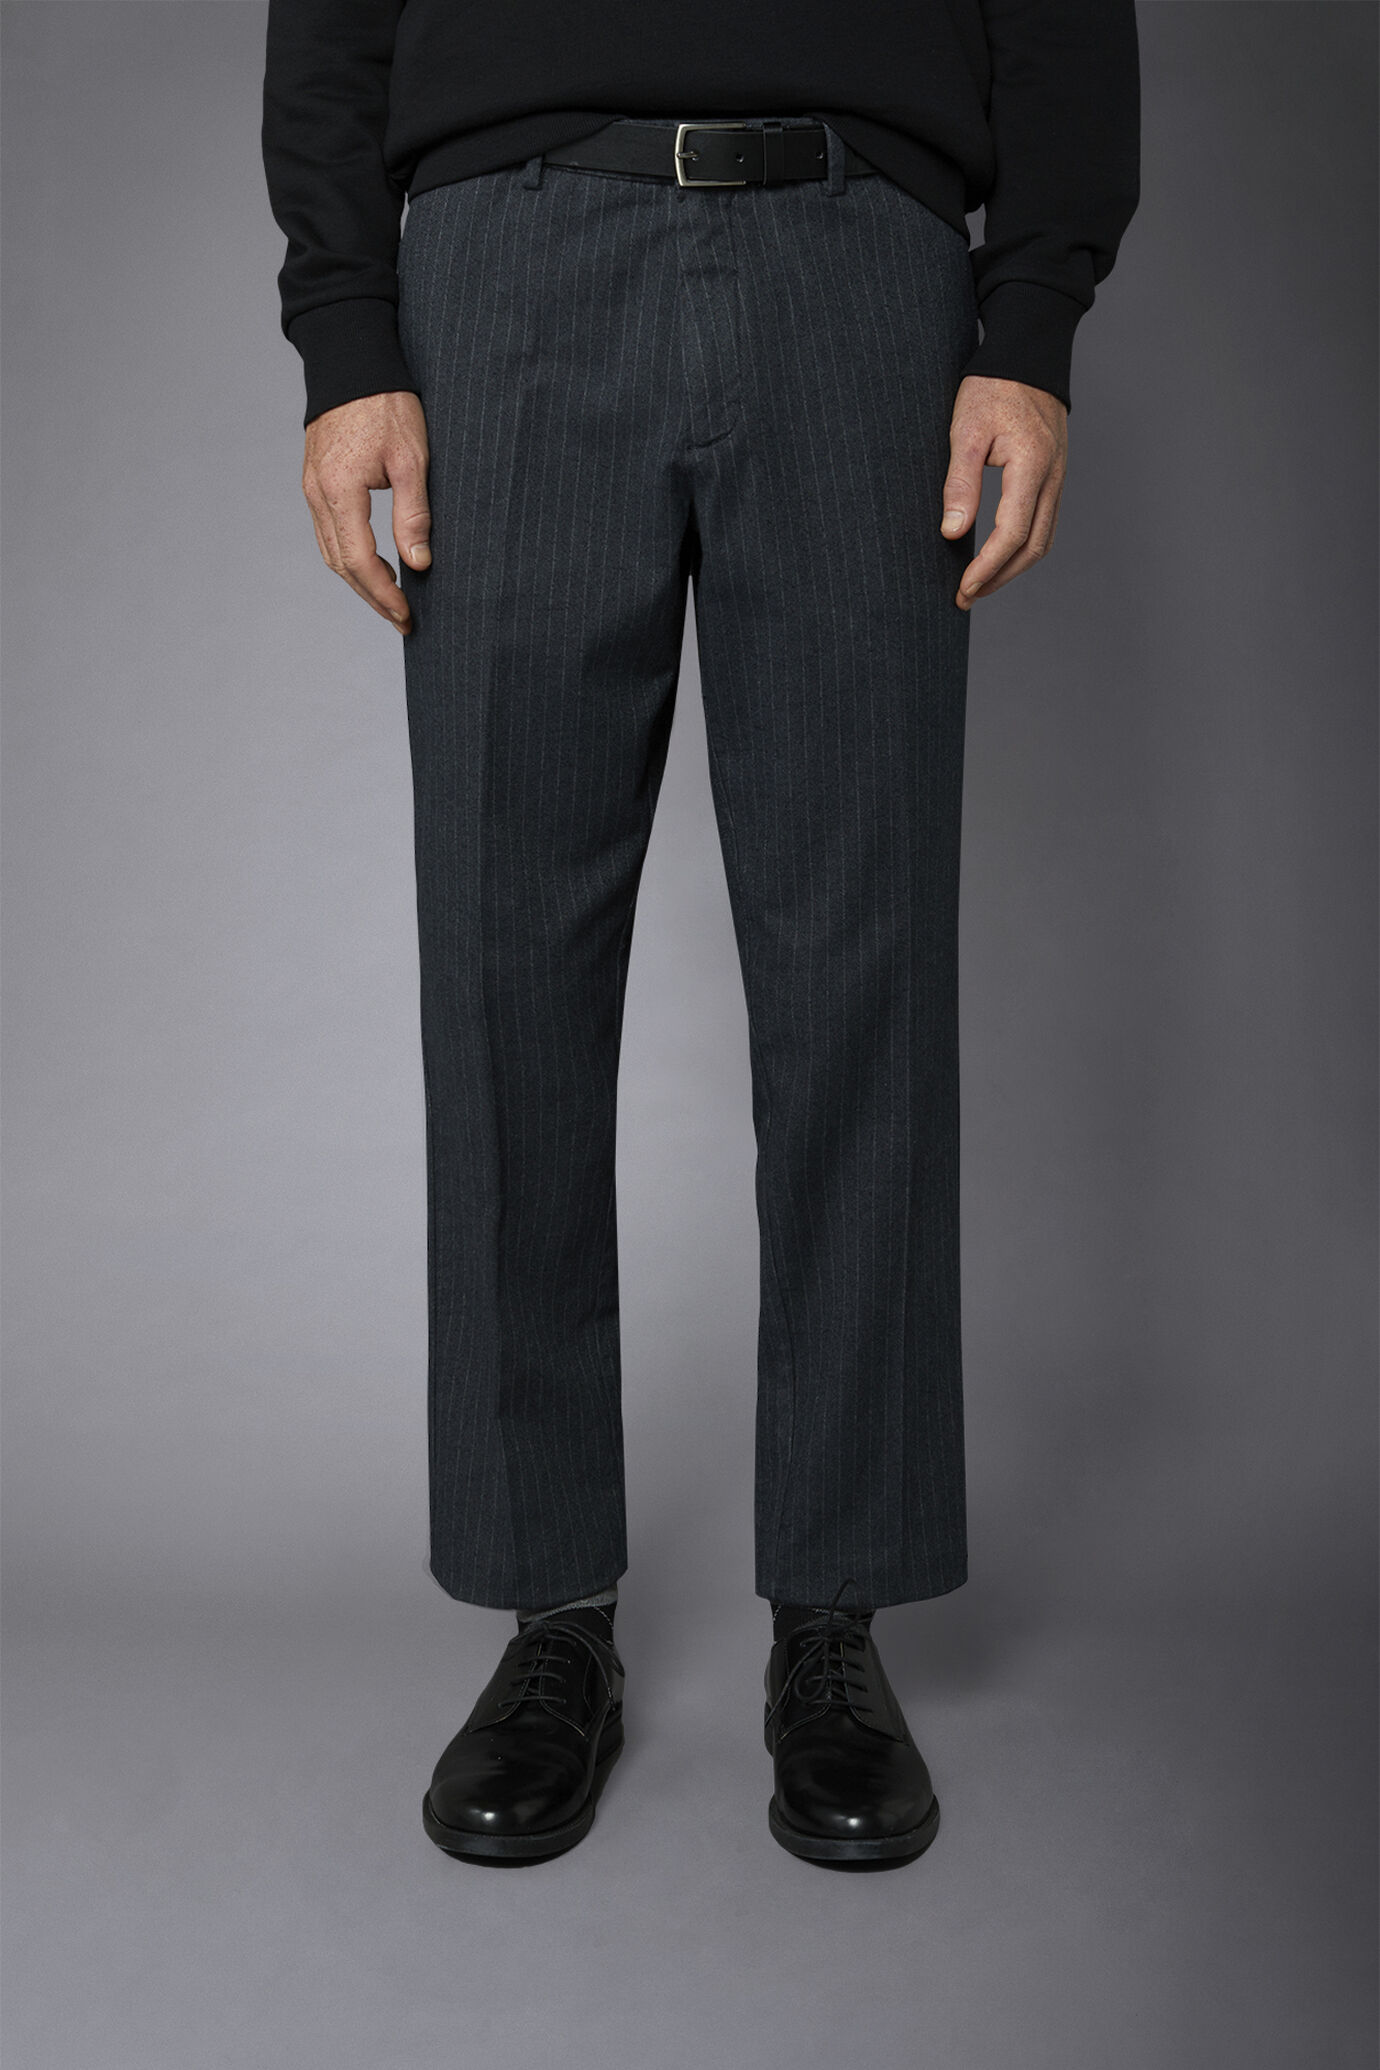 Men's chino pants woven cotton hand wool pinstripe comfort fit image number 3